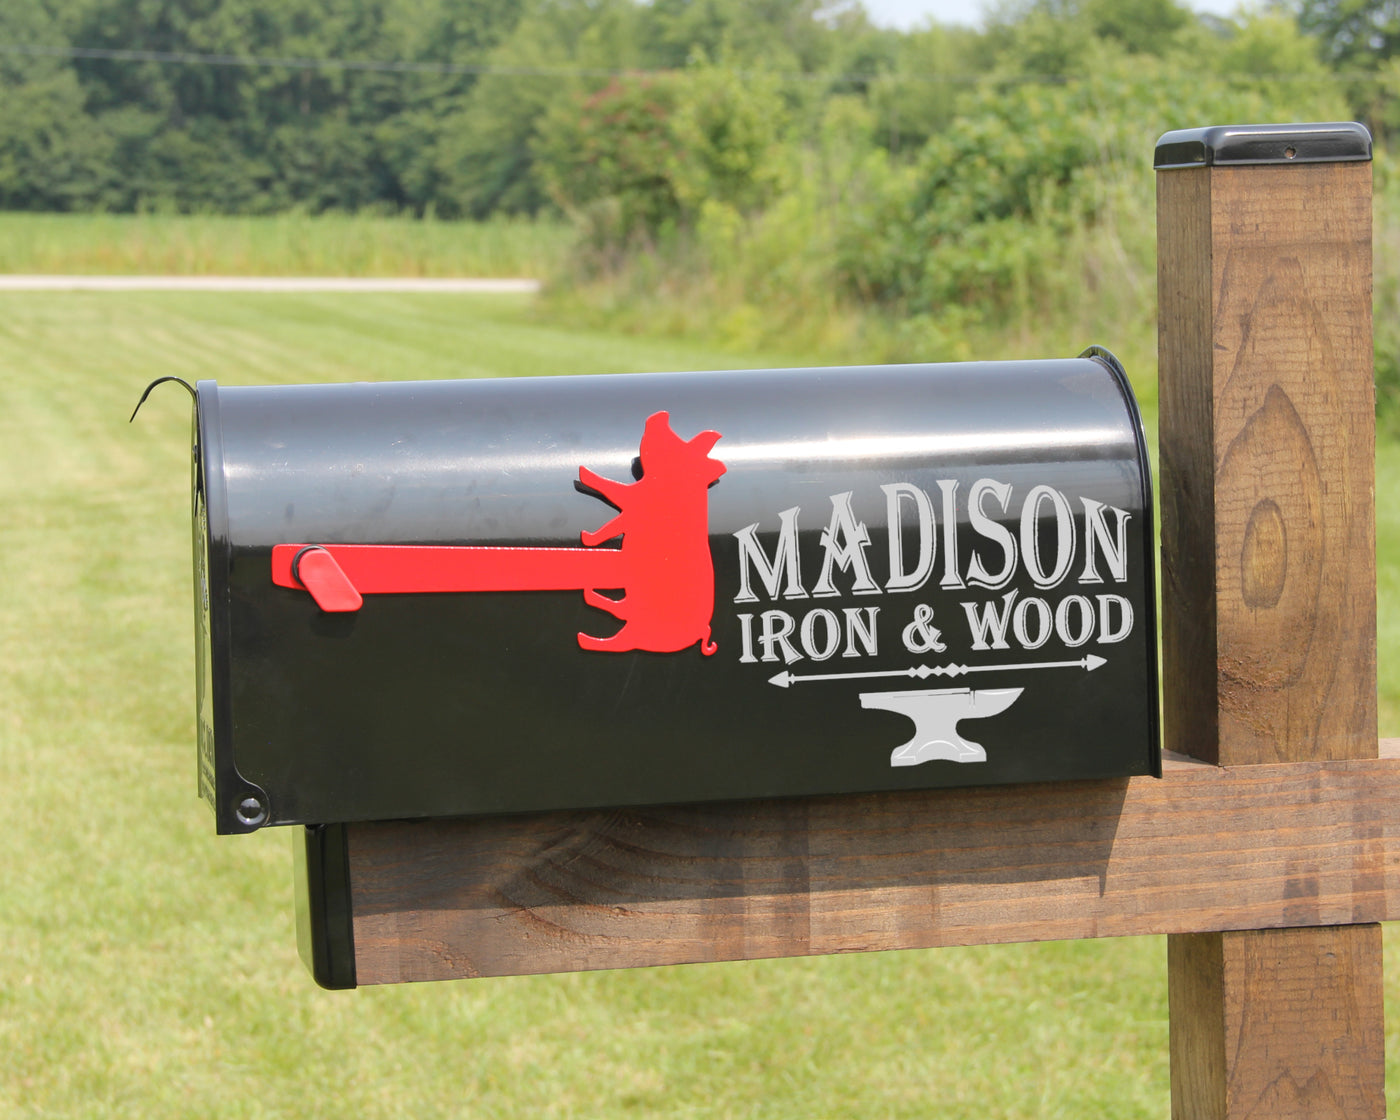 Pig Mailbox Flag - Madison Iron and Wood - Mailbox Post Decor - metal outdoor decor - Steel deocrations - american made products - veteran owned business products - fencing decorations - fencing supplies - custom wall decorations - personalized wall signs - steel - decorative post caps - steel post caps - metal post caps - brackets - structural brackets - home improvement - easter - easter decorations - easter gift - easter yard decor